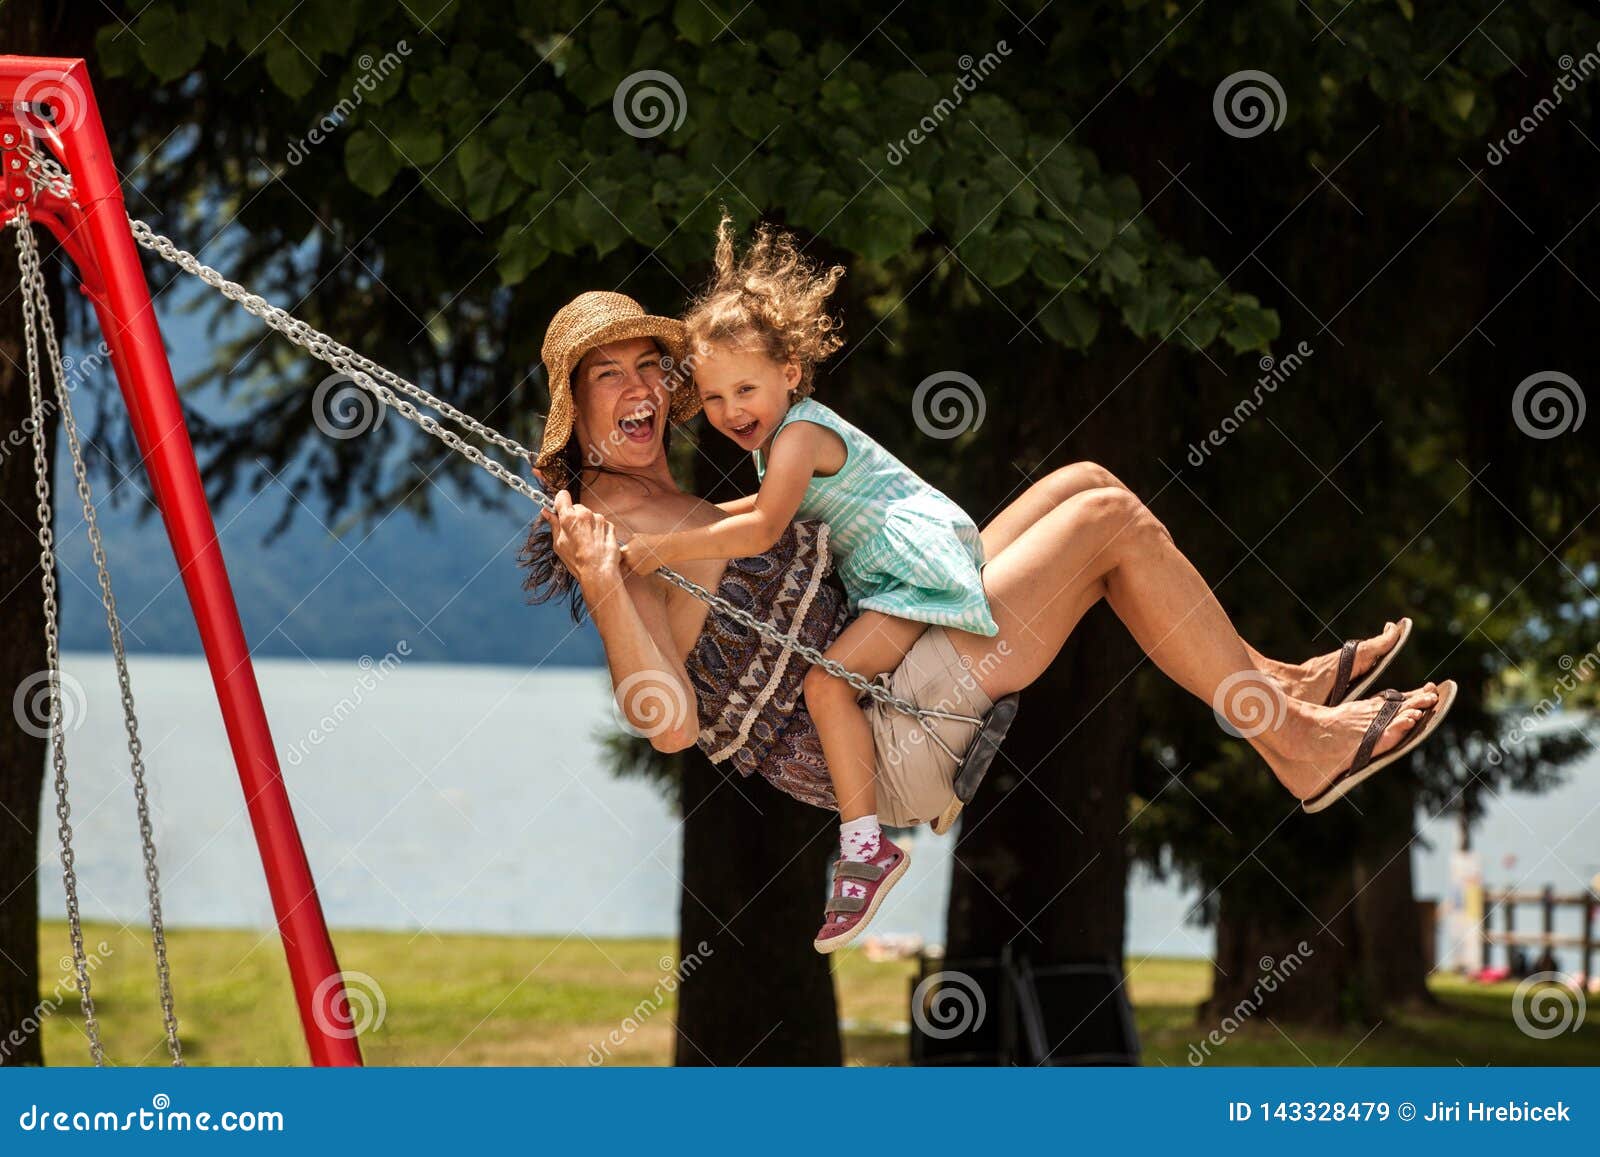 happy loving family! young mother and her child daughter swinging on the swings and laughing a summer evening outdoors, beautiful